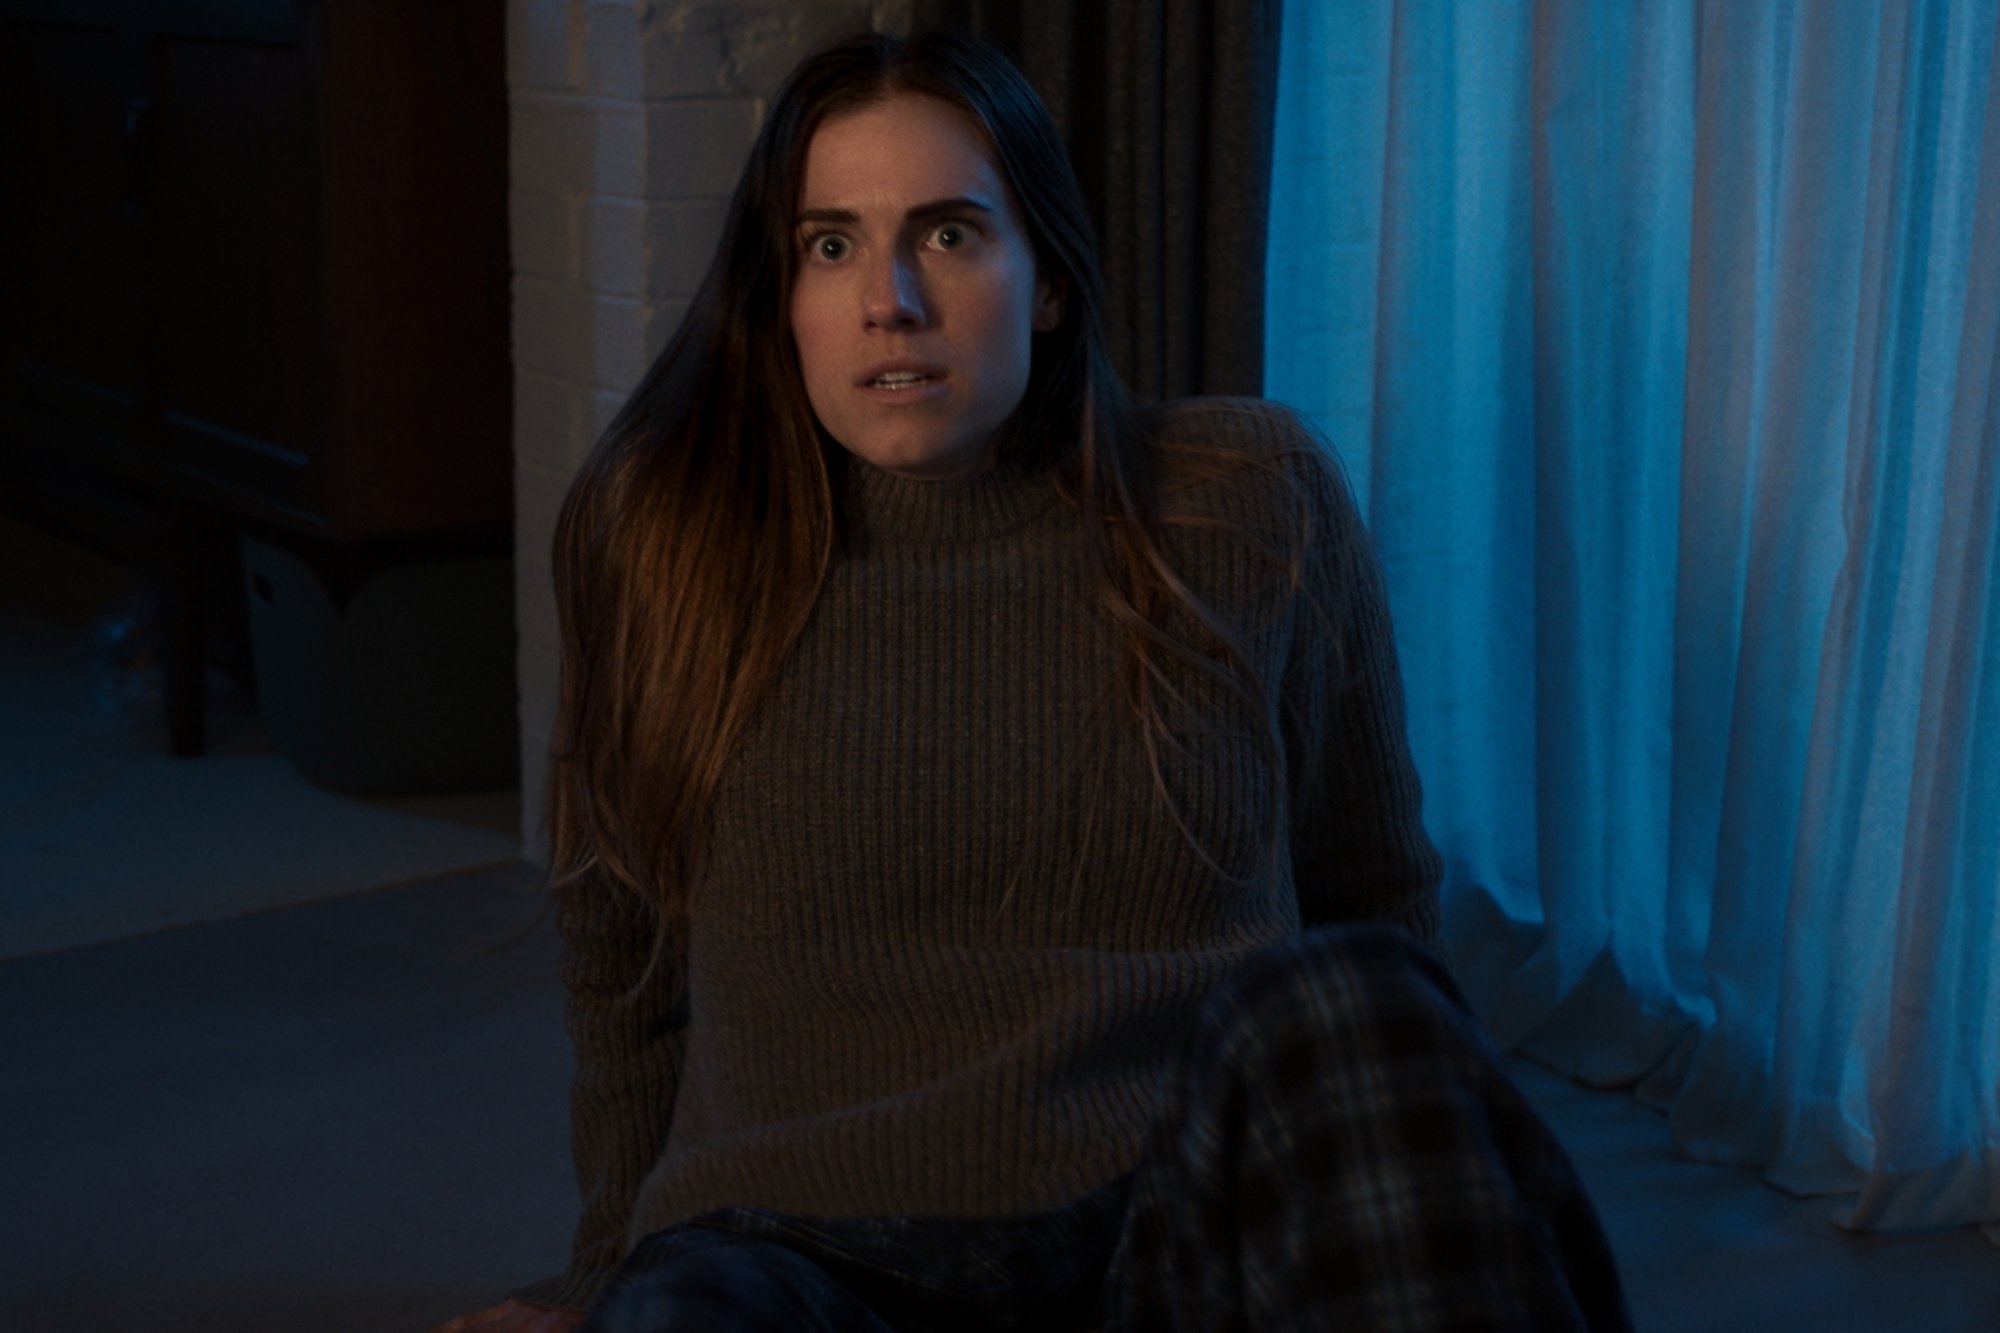 'M3GAN' Allison Williams as Gemma sitting on the ground in front of curtains, looking terrified